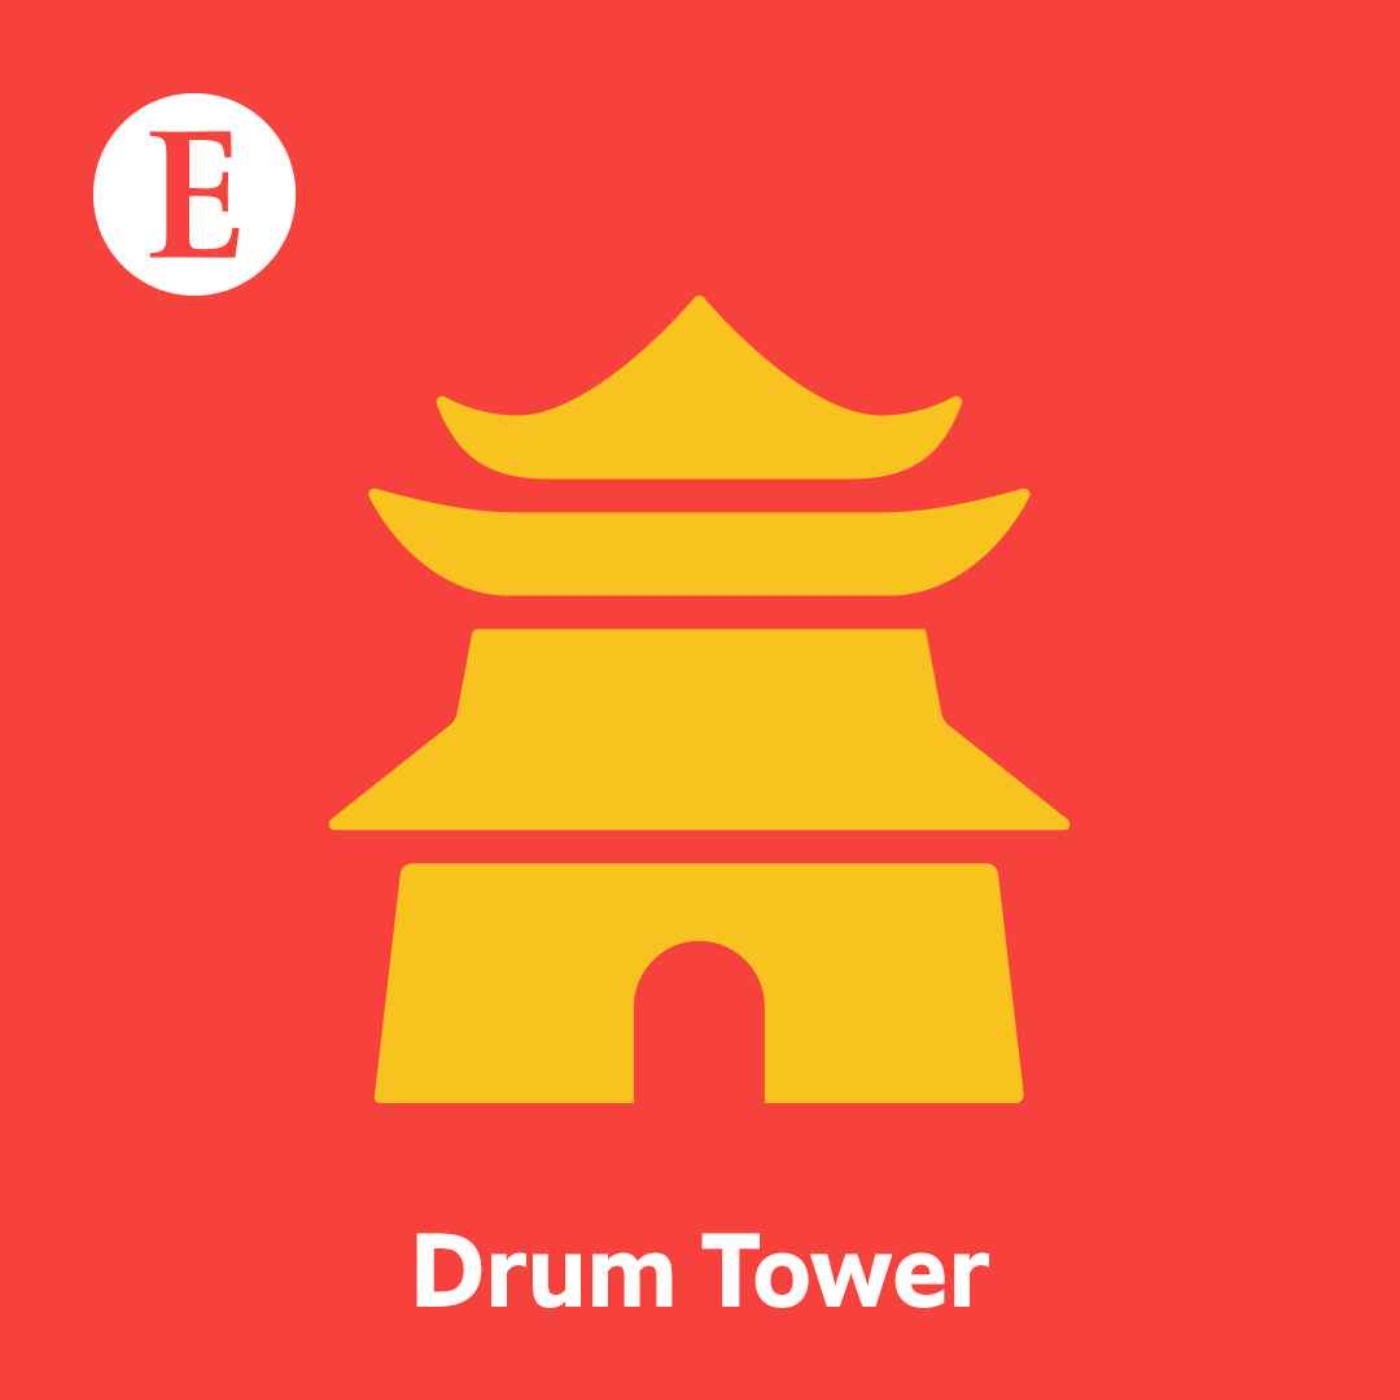 Drum Tower: Better than a punch in the face